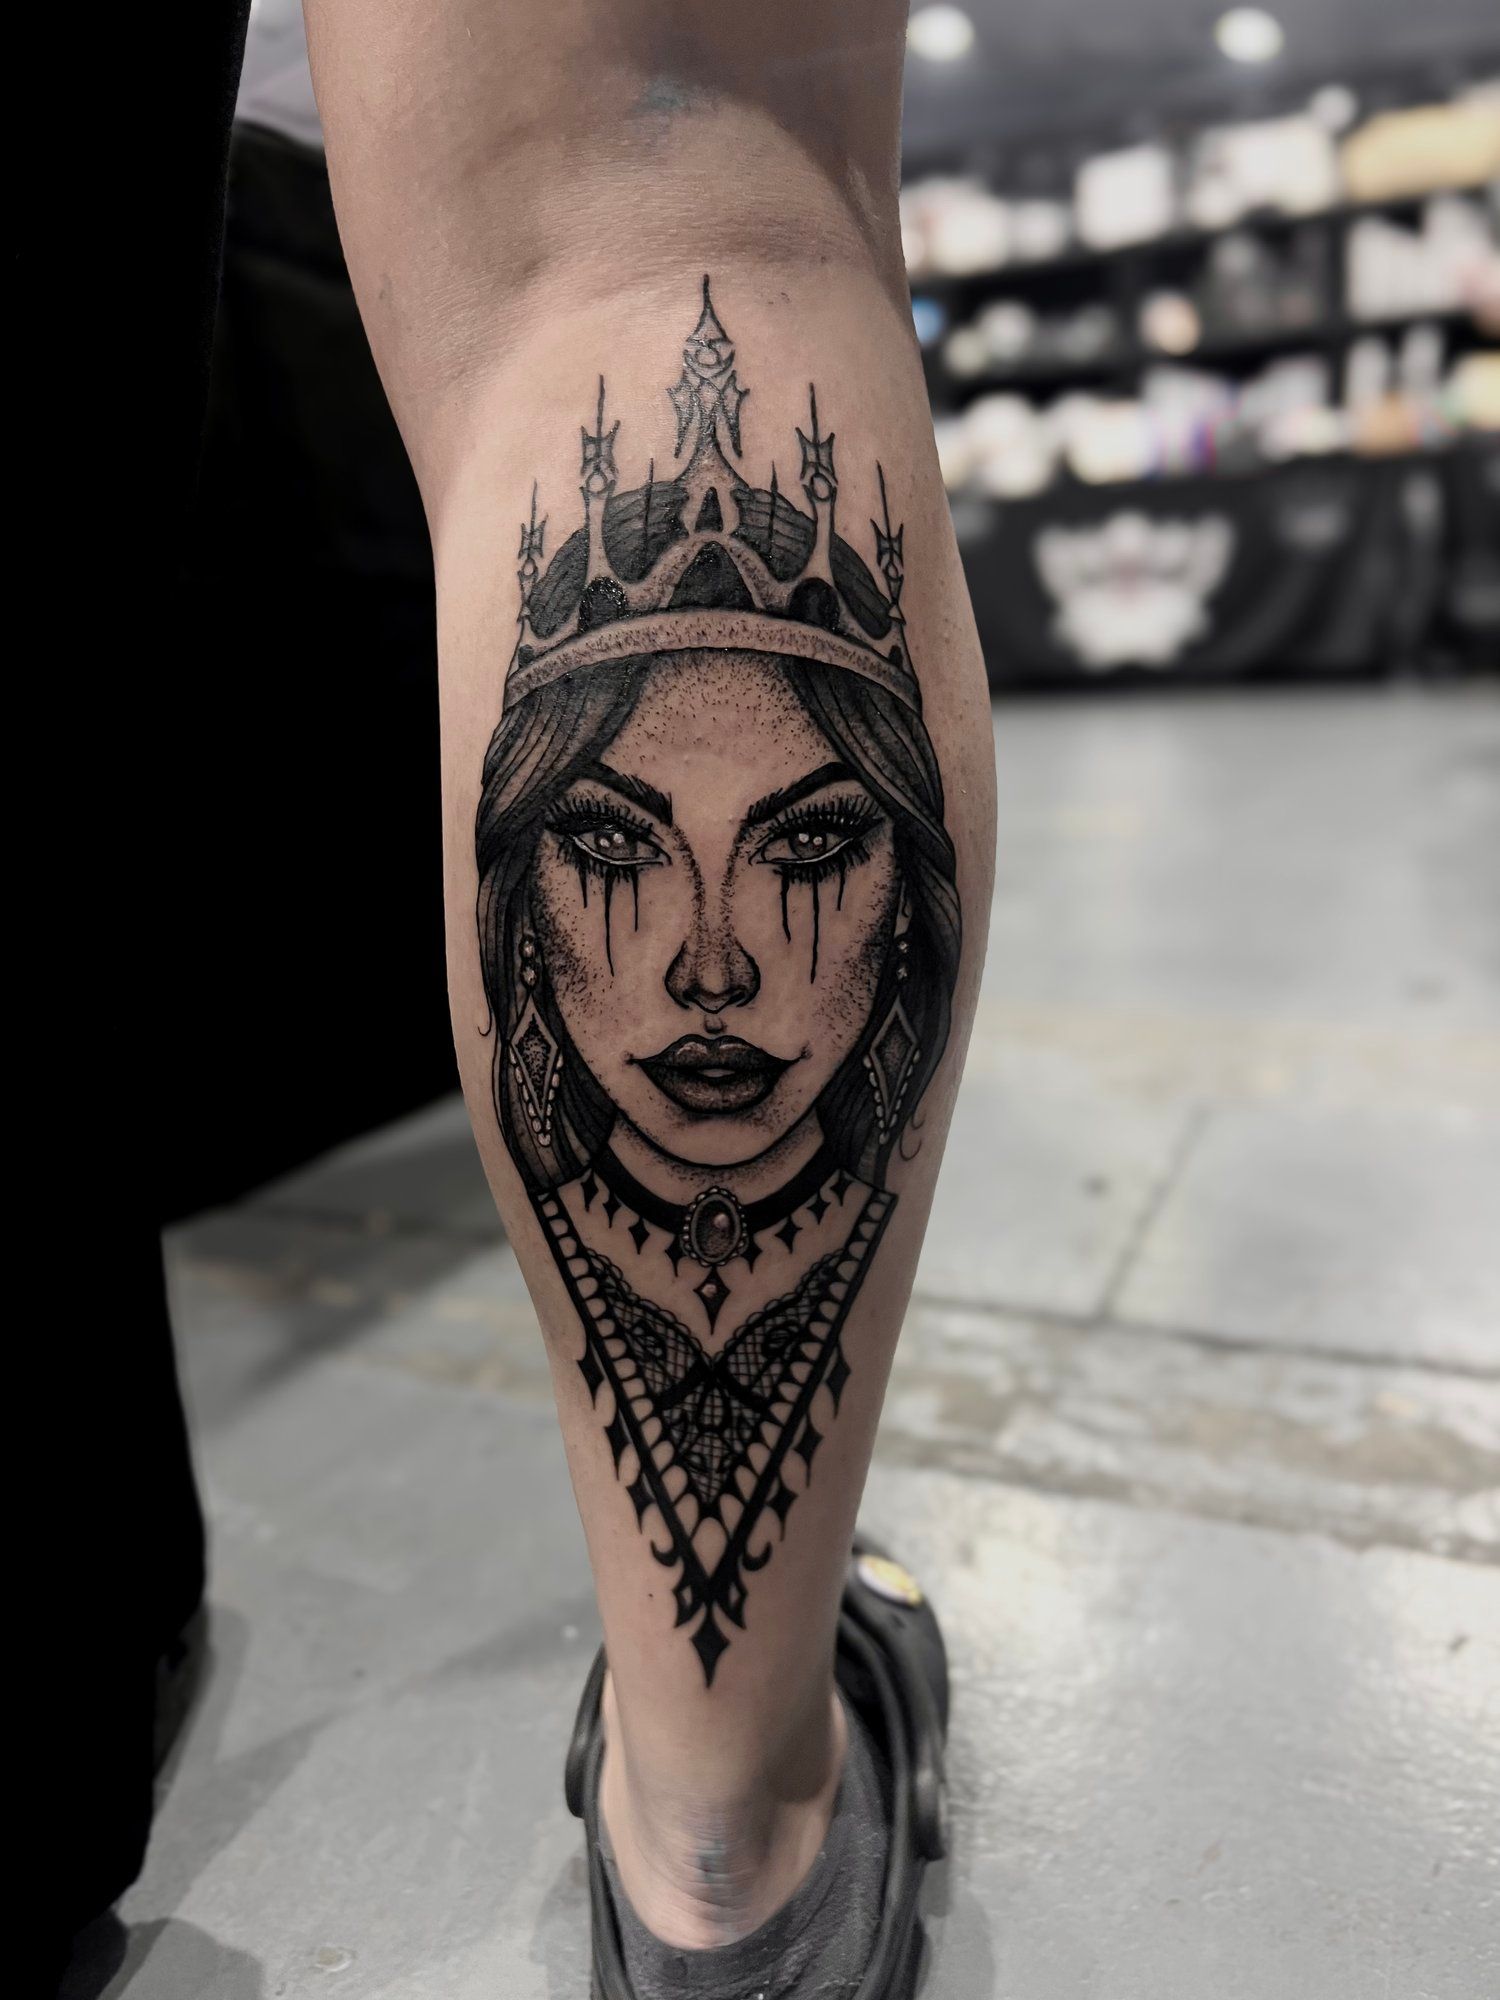 A tattoo of a woman with a crown on her head